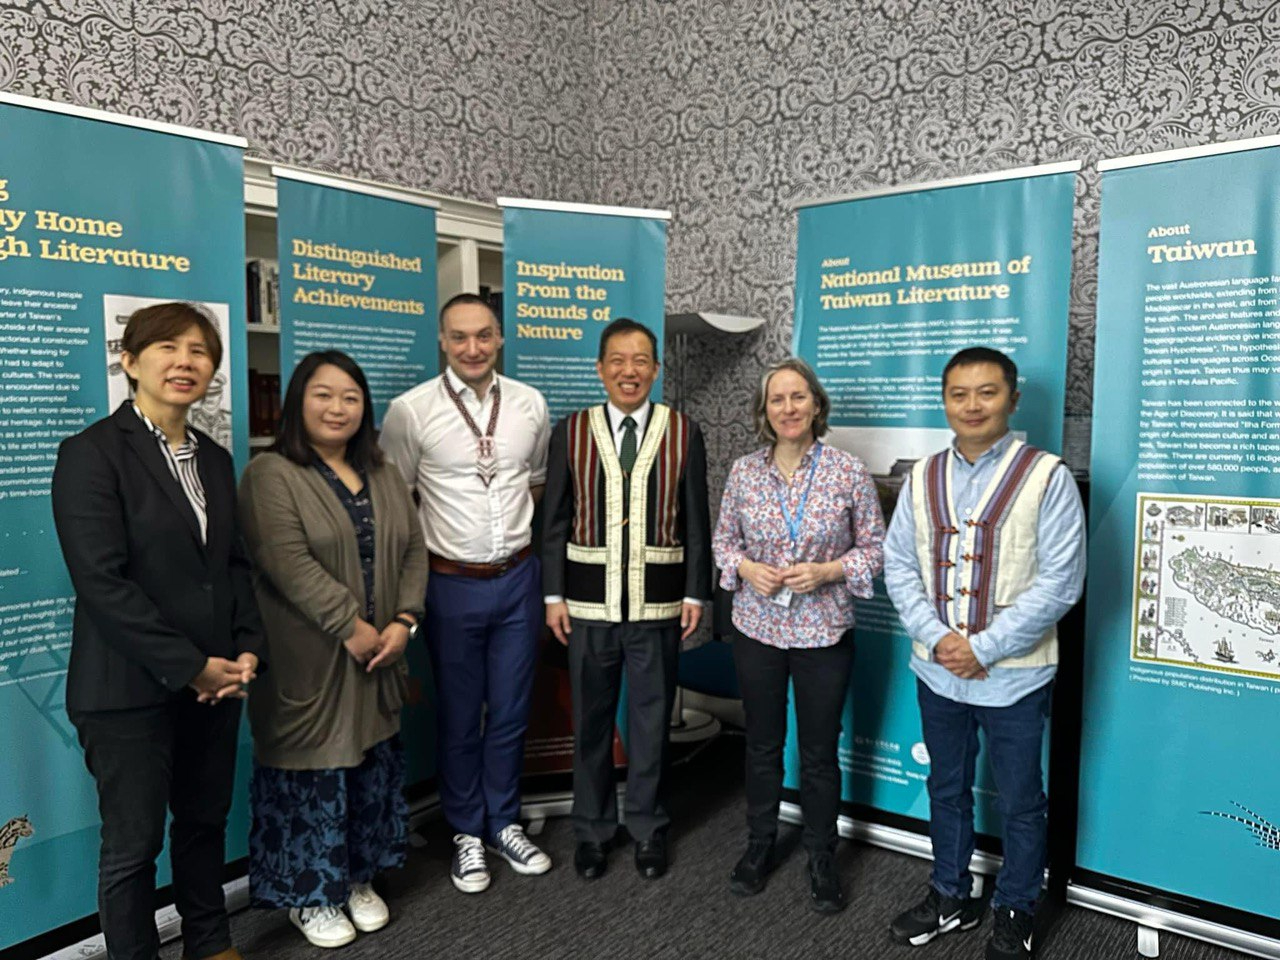 Researchers from the National Museum of Taiwan Literature of Taiwan attended the opining of Taiwan's Indigenous Literature Exhibition and delivered speeches on this topic. 